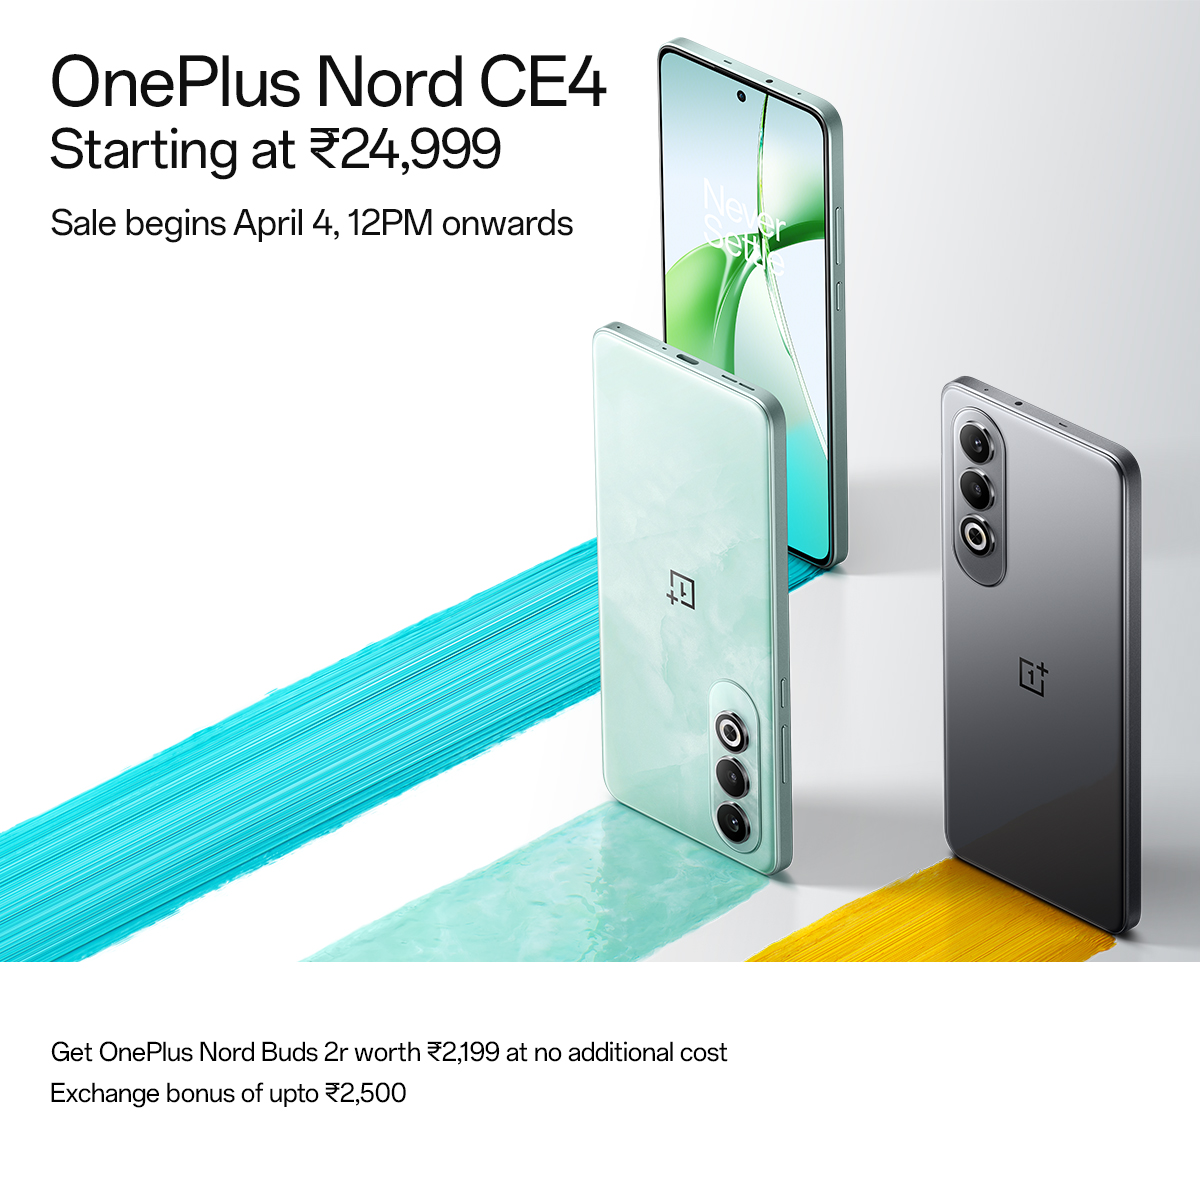 Now that you know everything there is to know about the #OnePlusNordCE4, get in line to get one for yourself. No pushing! Get yours on 4th April and get a Nord Buds 2r at no additional cost.